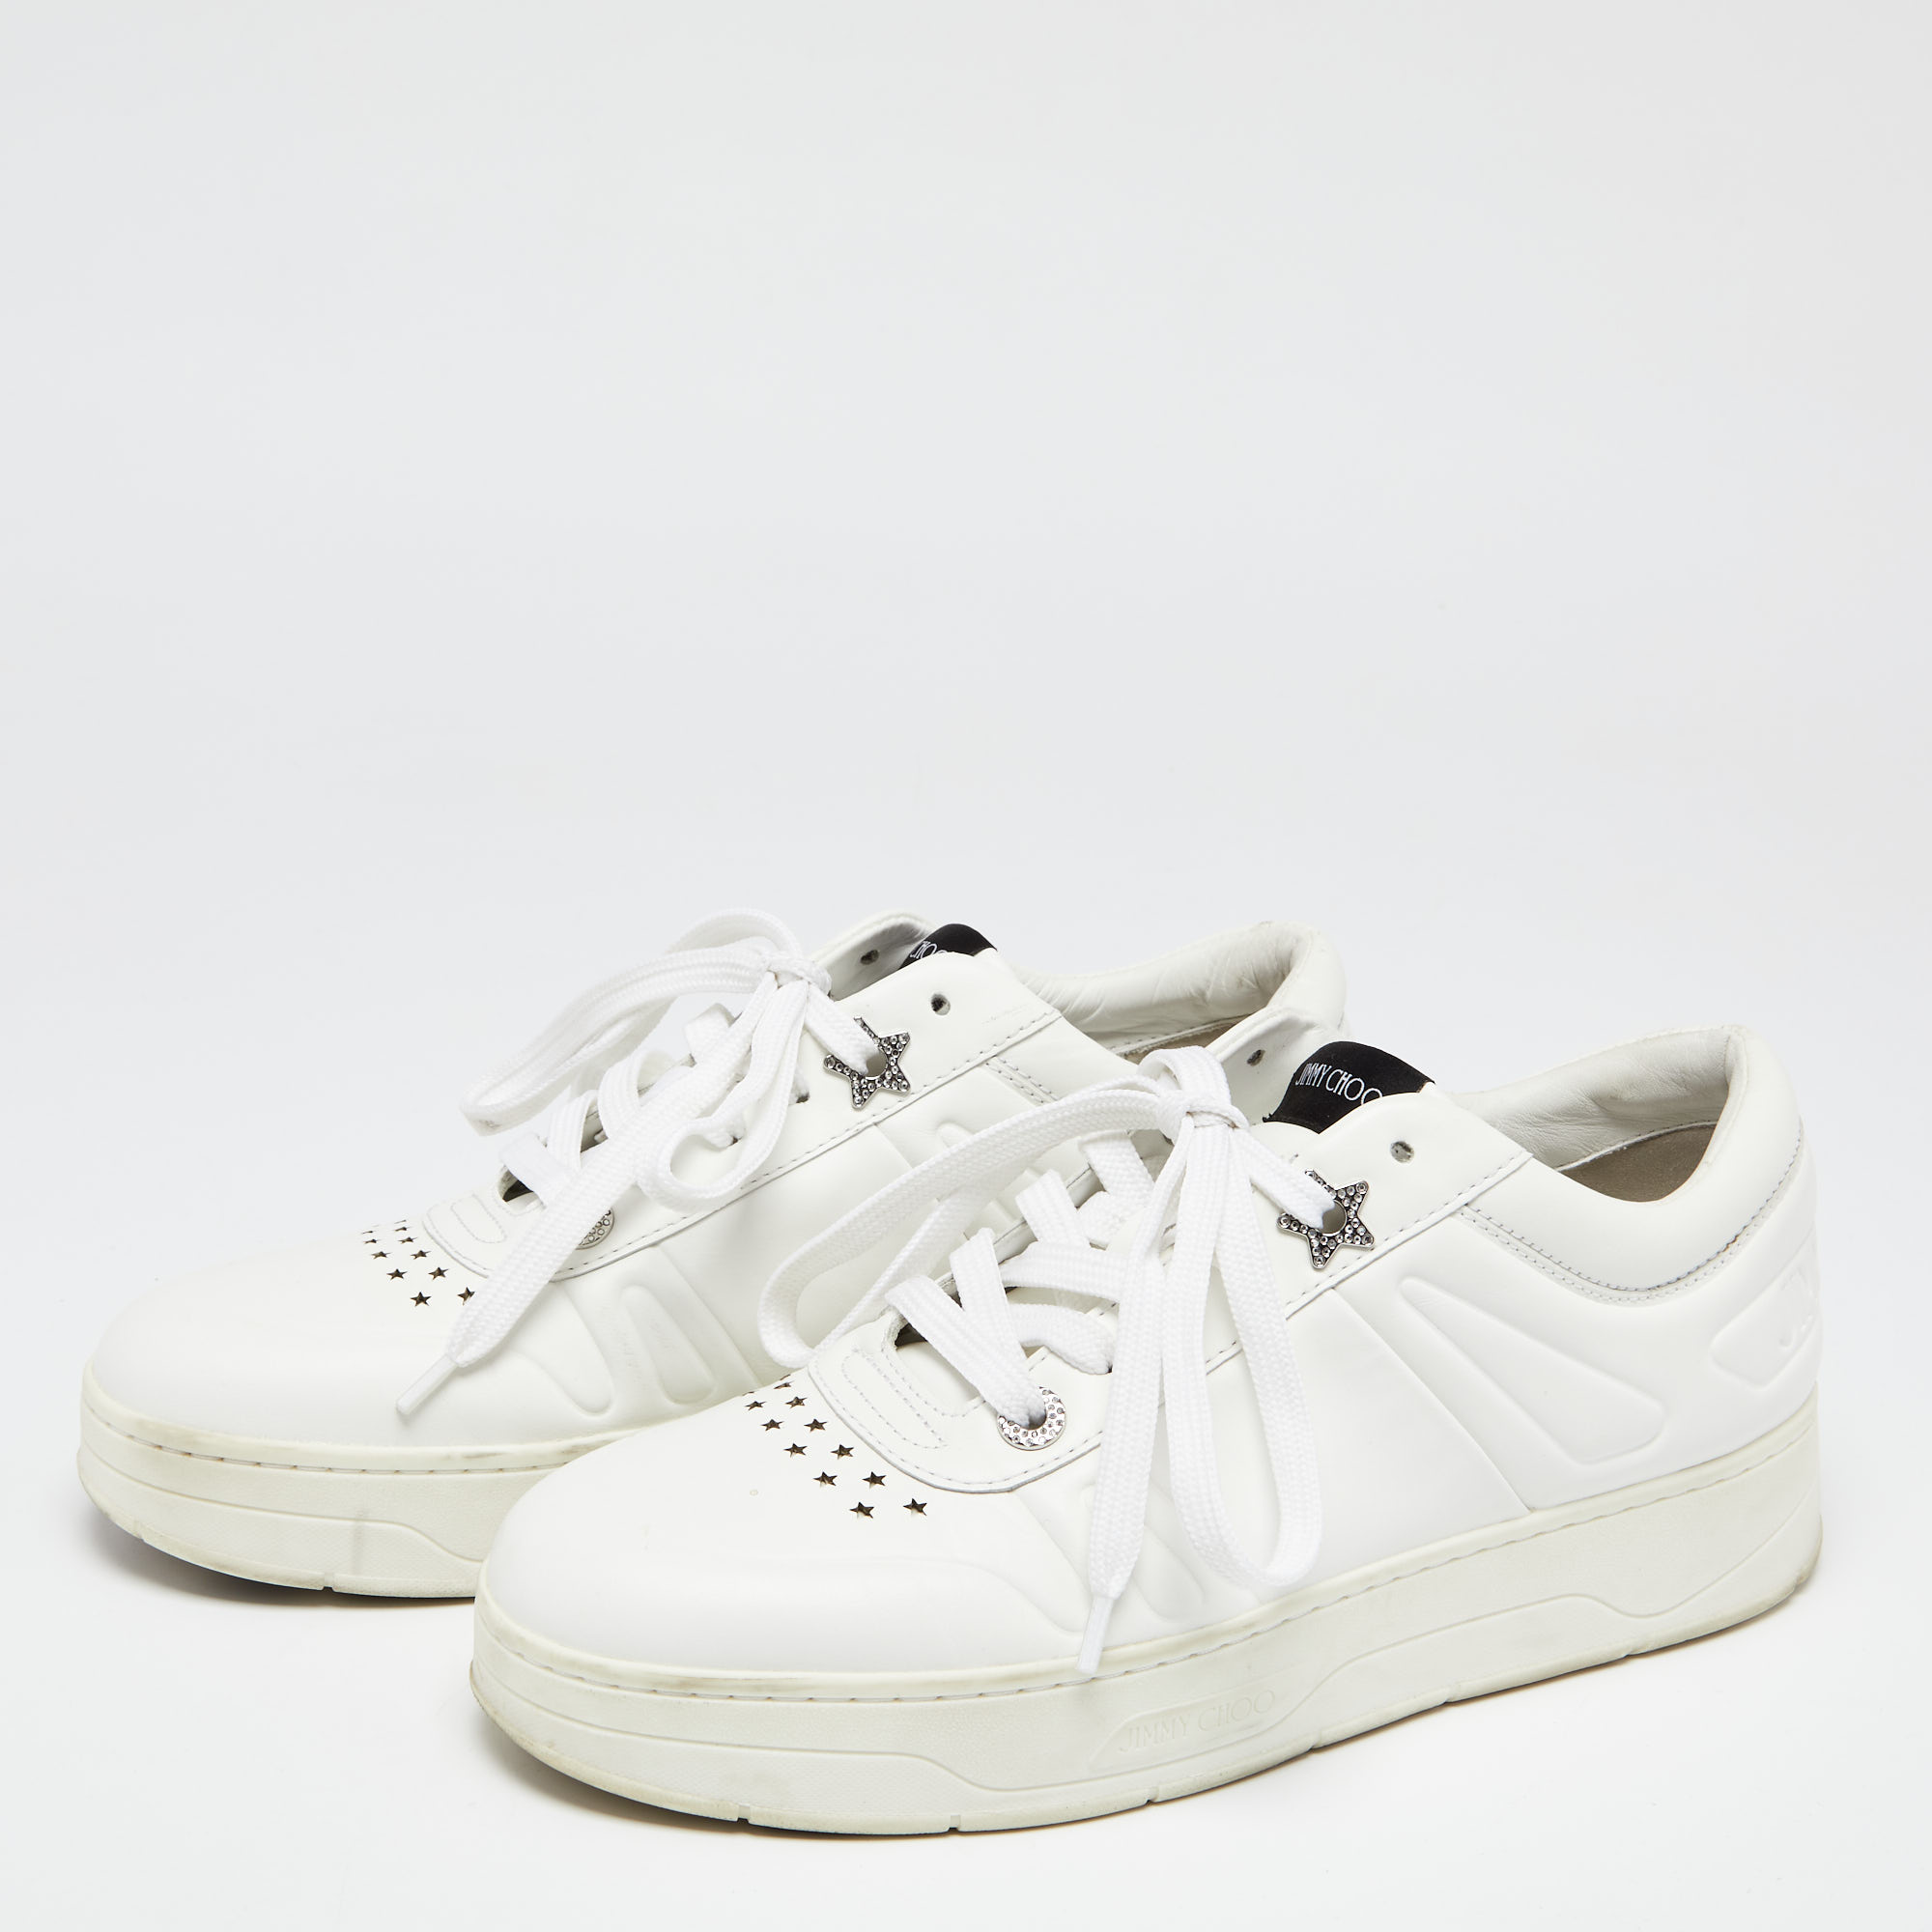 

Jimmy Choo White Leather Studded Hawaii/F Low Top Sneakers Size